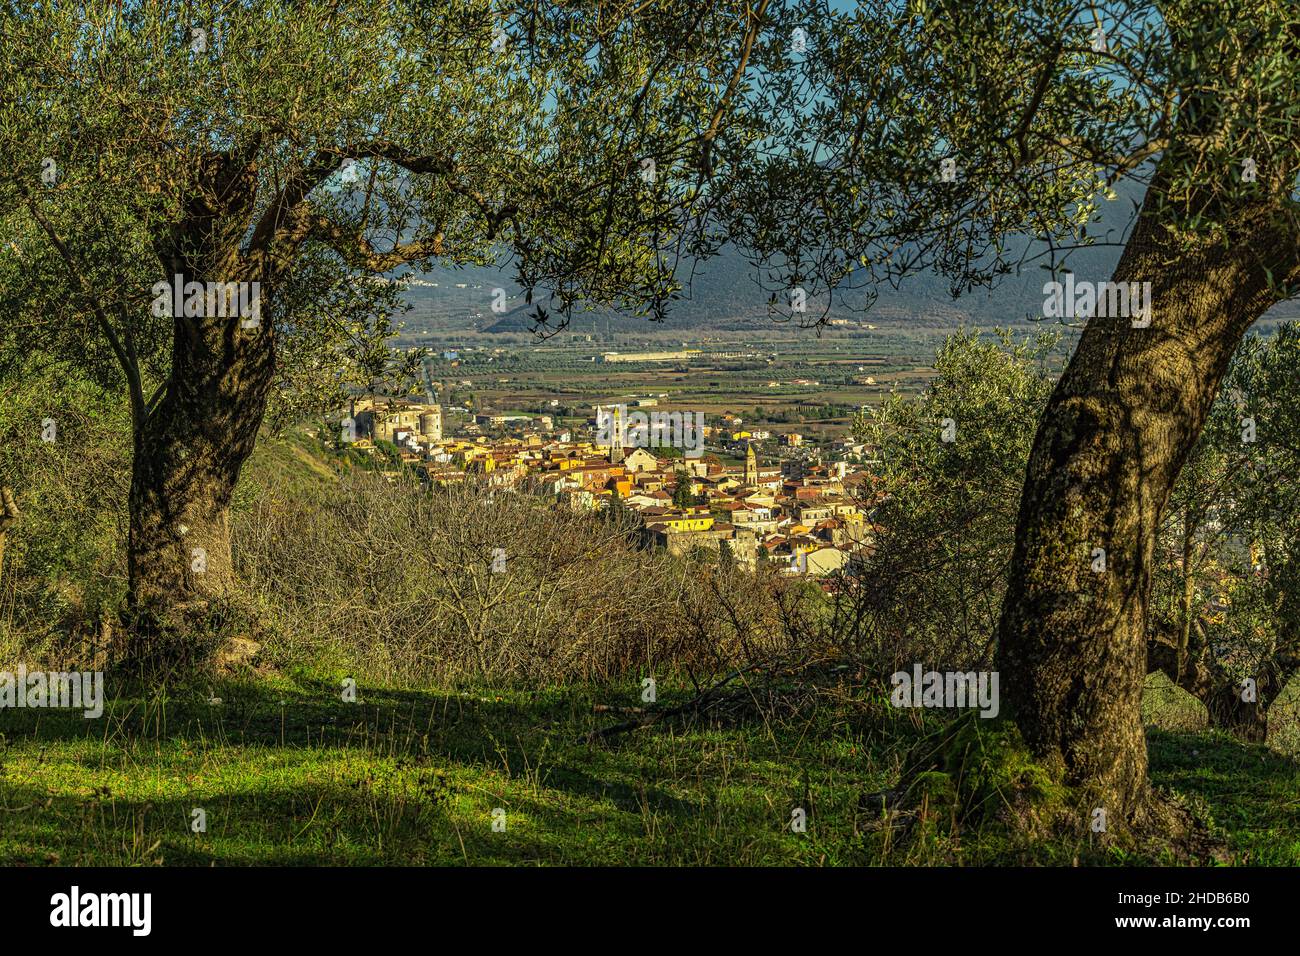 The ancient Molise city of Venafro. Photographed from the natural reserve of the Parco dell'Olivo. Venafro, Isernia province, Molise, Italy, Europe Stock Photo